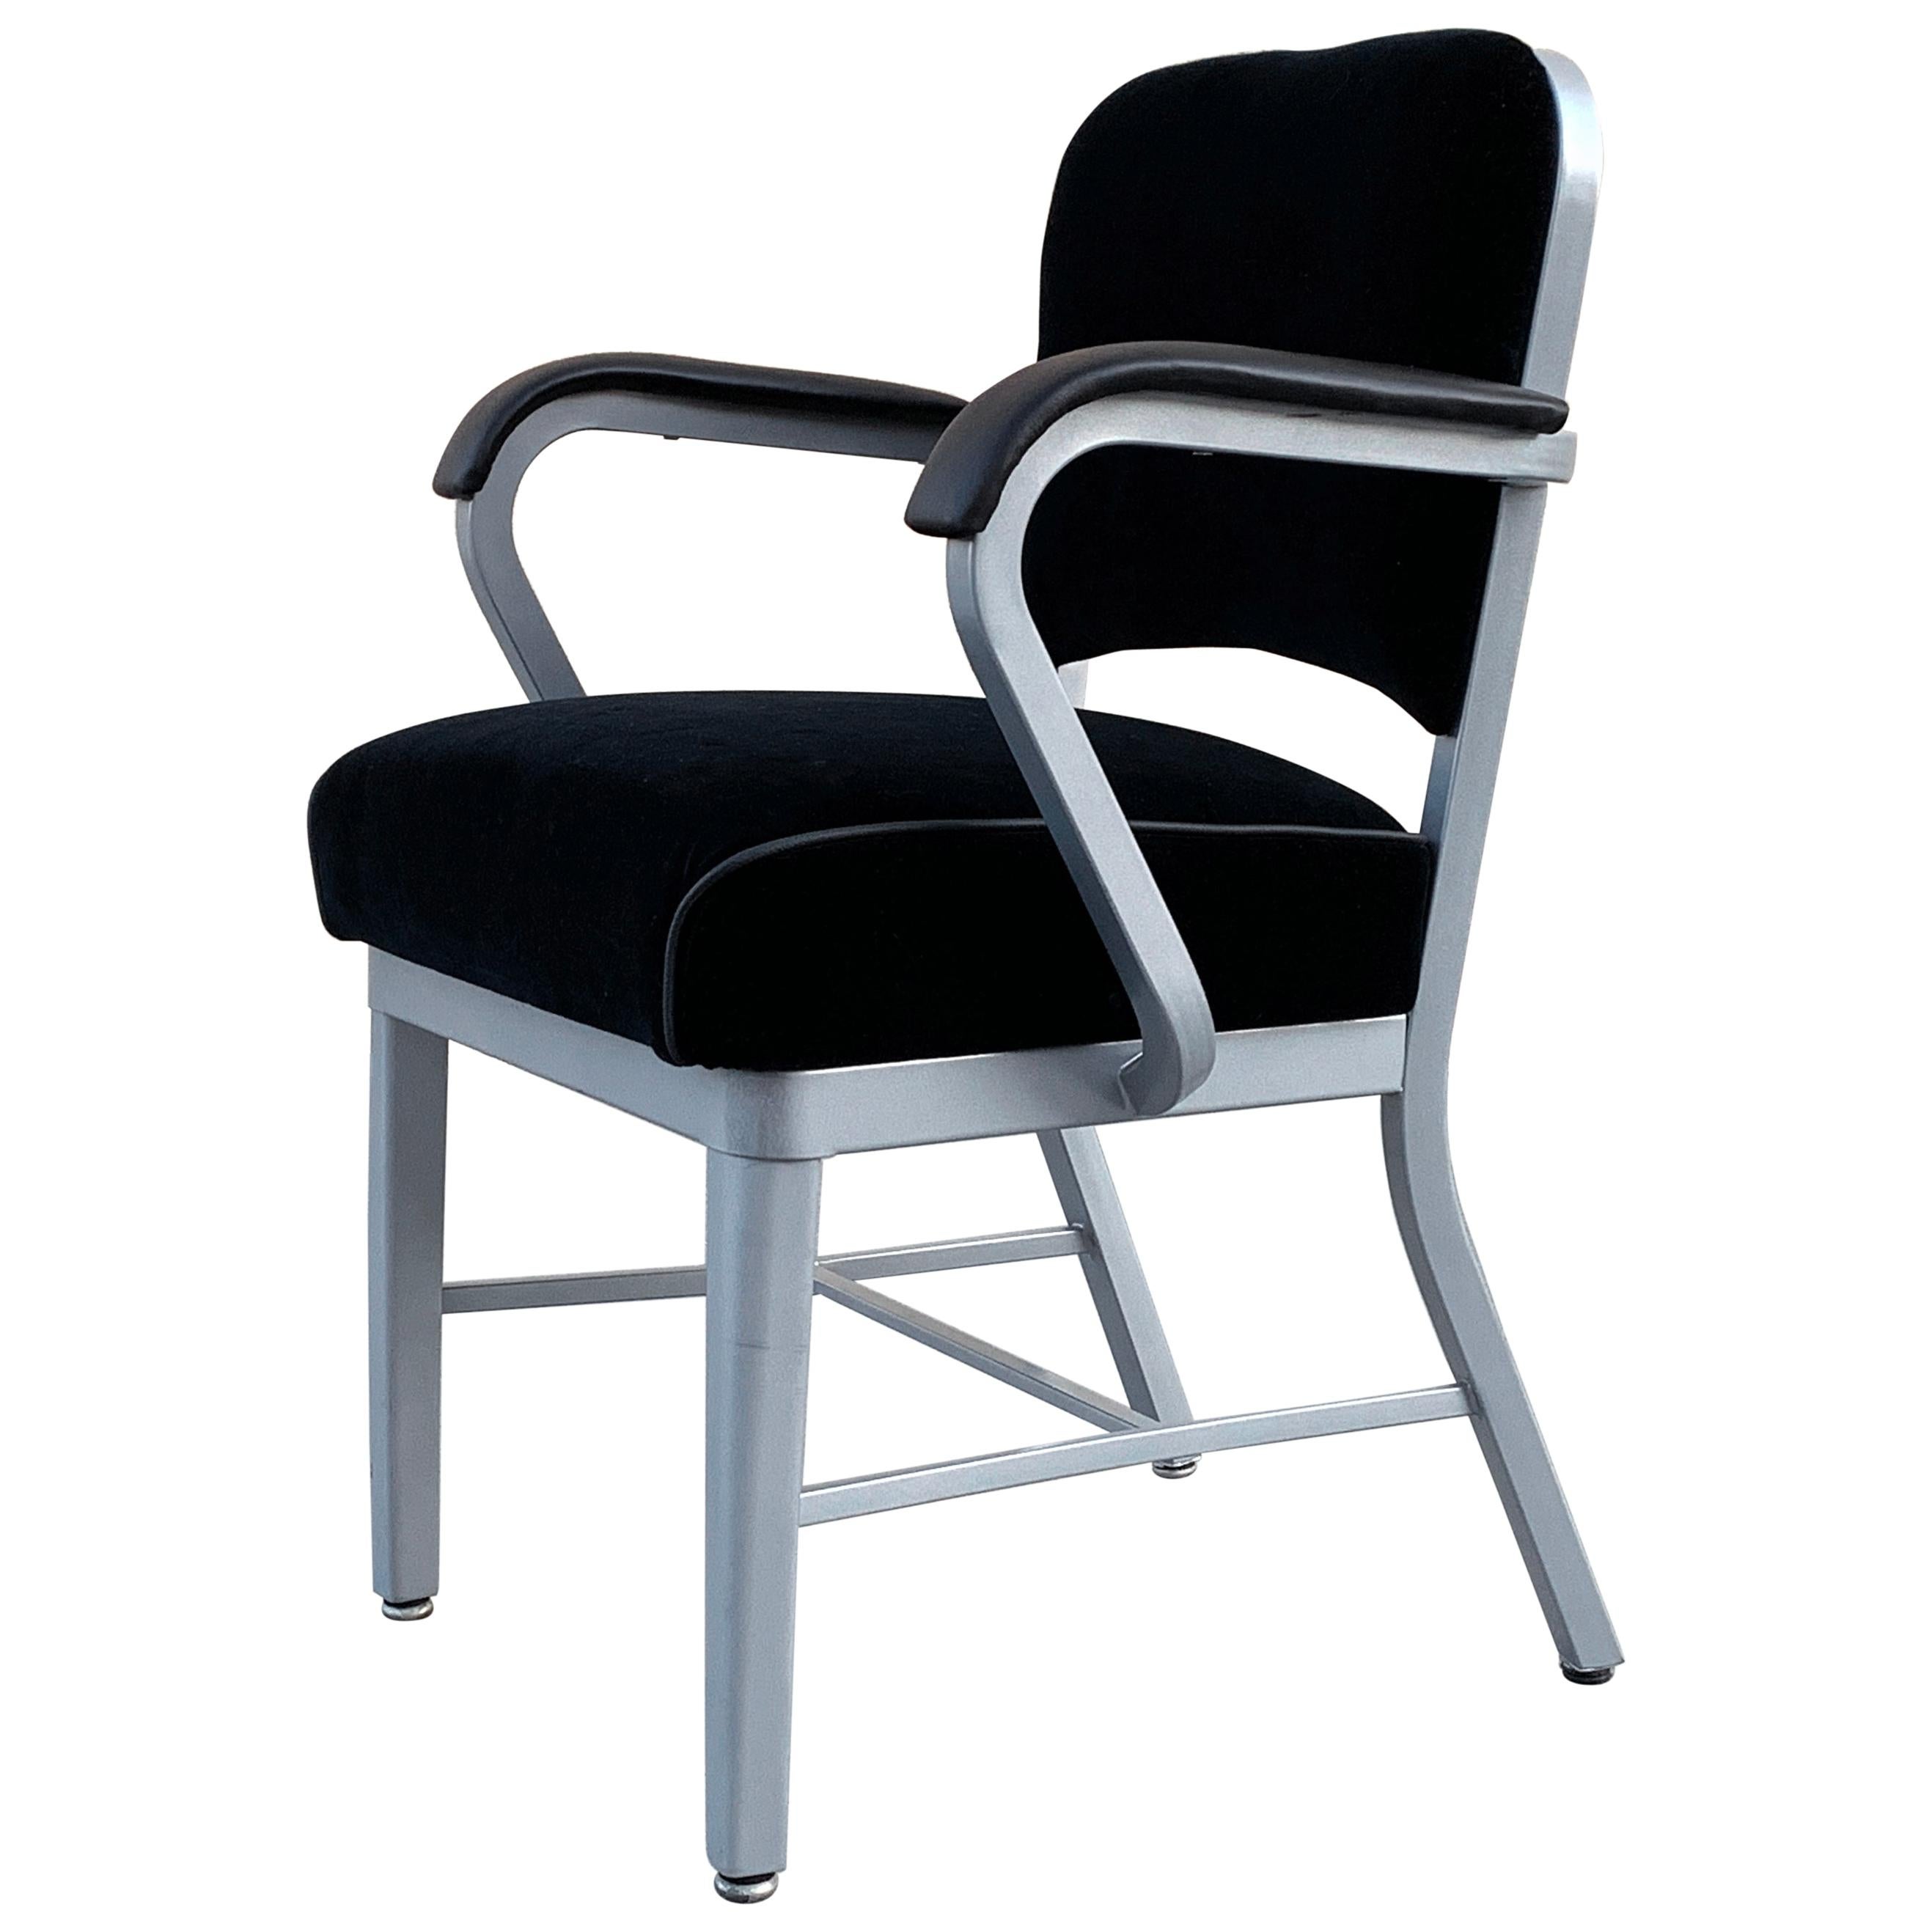 Midcentury Steel Tanker Armchair, Refinished in Bengal Silver and Black Velvet